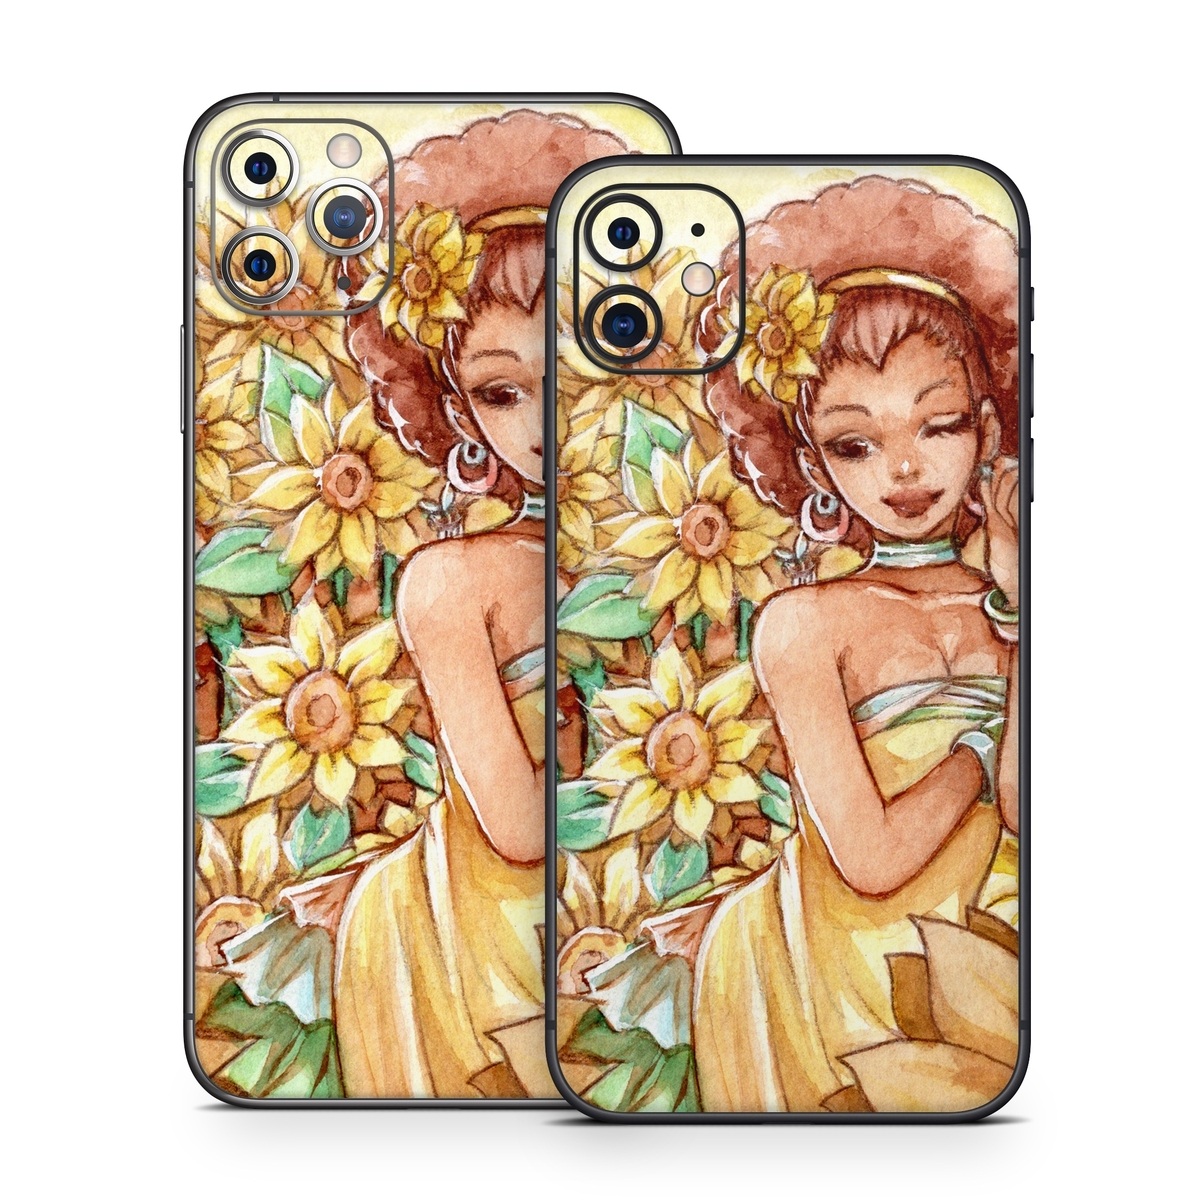 iPhone 11 Series Skin design of Painting, Illustration, Art, Fictional character, Plant, Flower, Clip art, with yellow, orange, brown, green colors